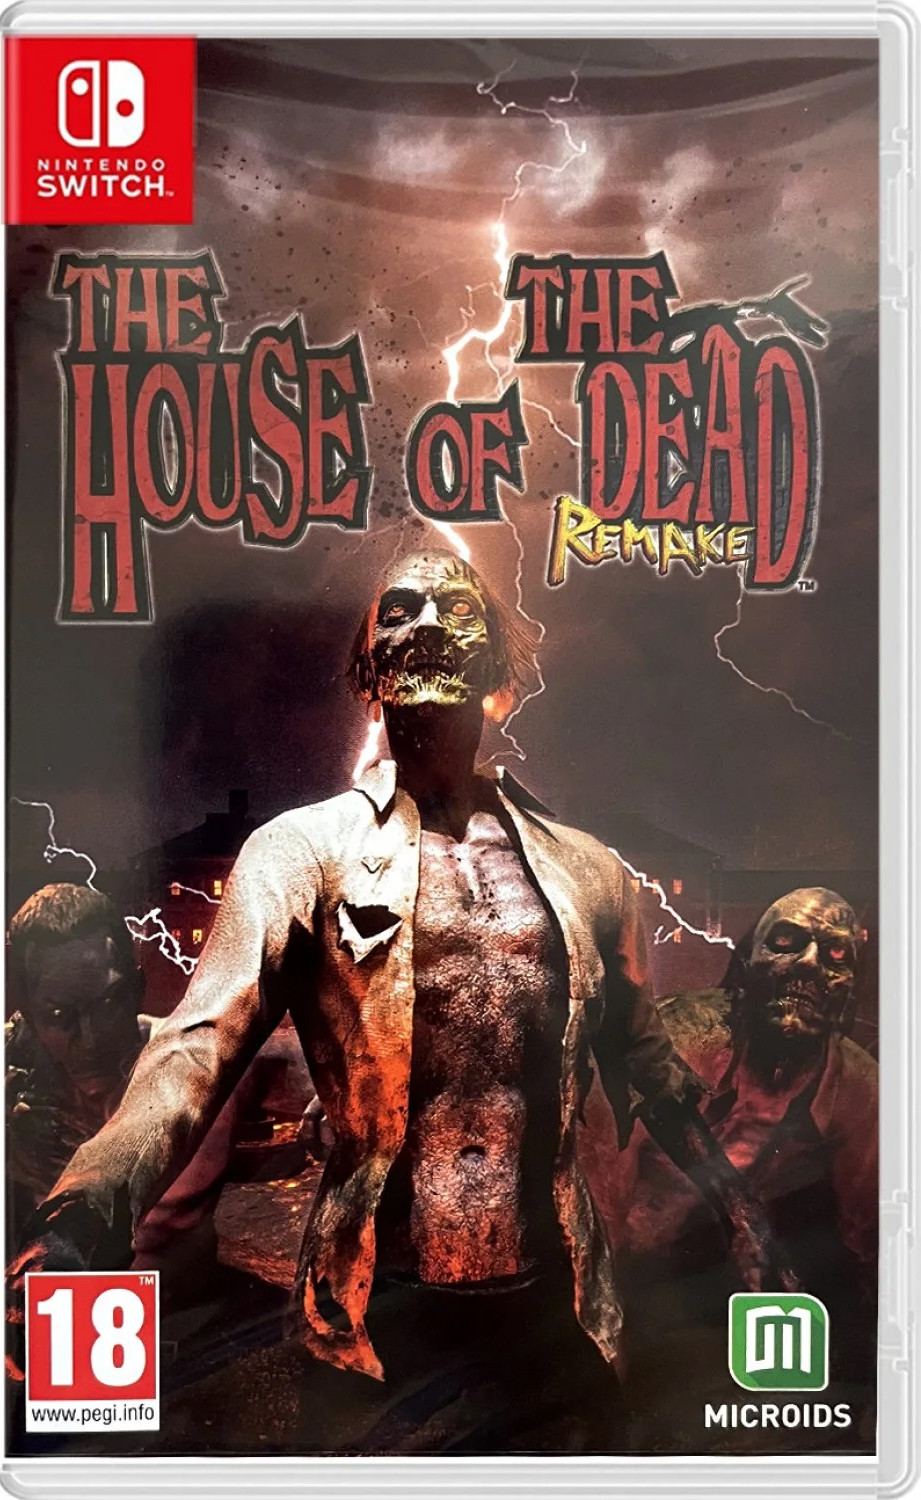 The House of the Dead Remake - Nintendo Switch